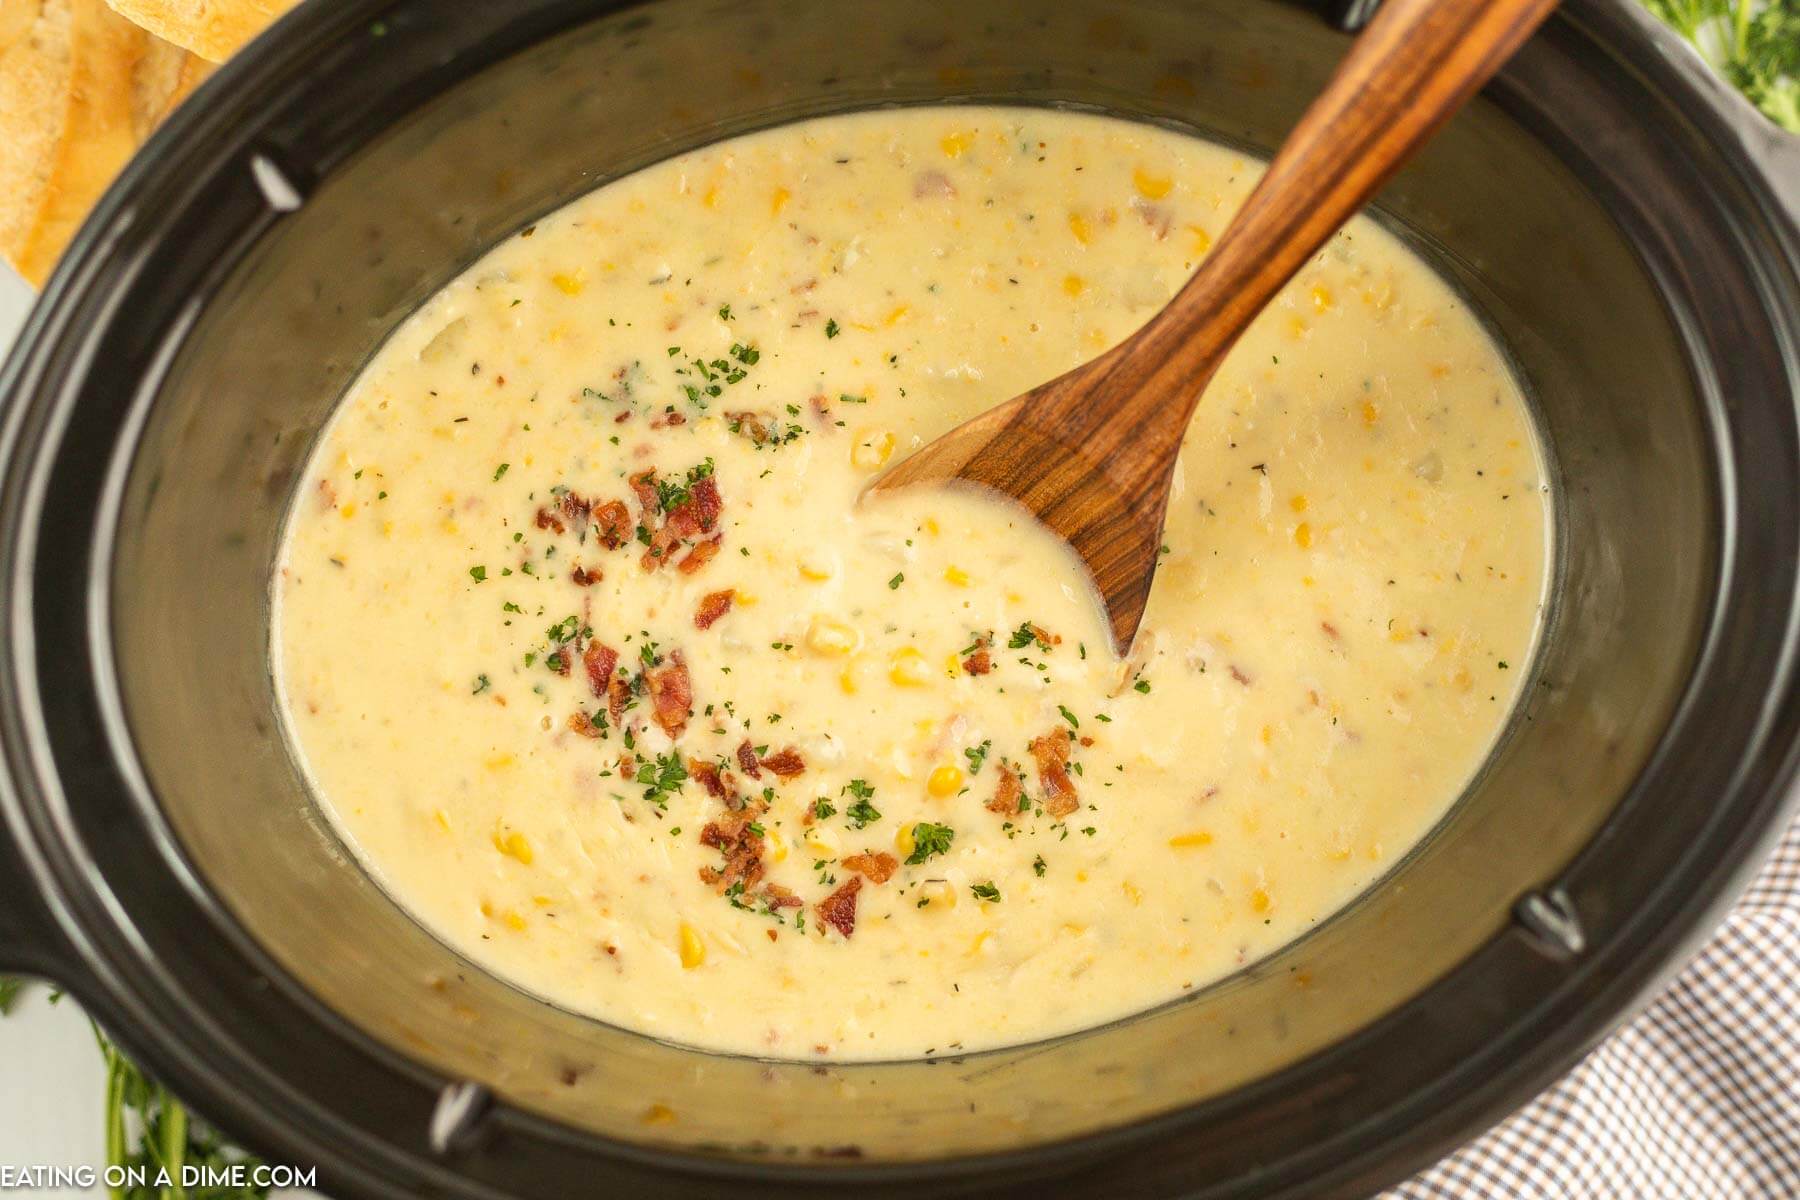 Corn chowder in the slow cooker with a wooden spoon